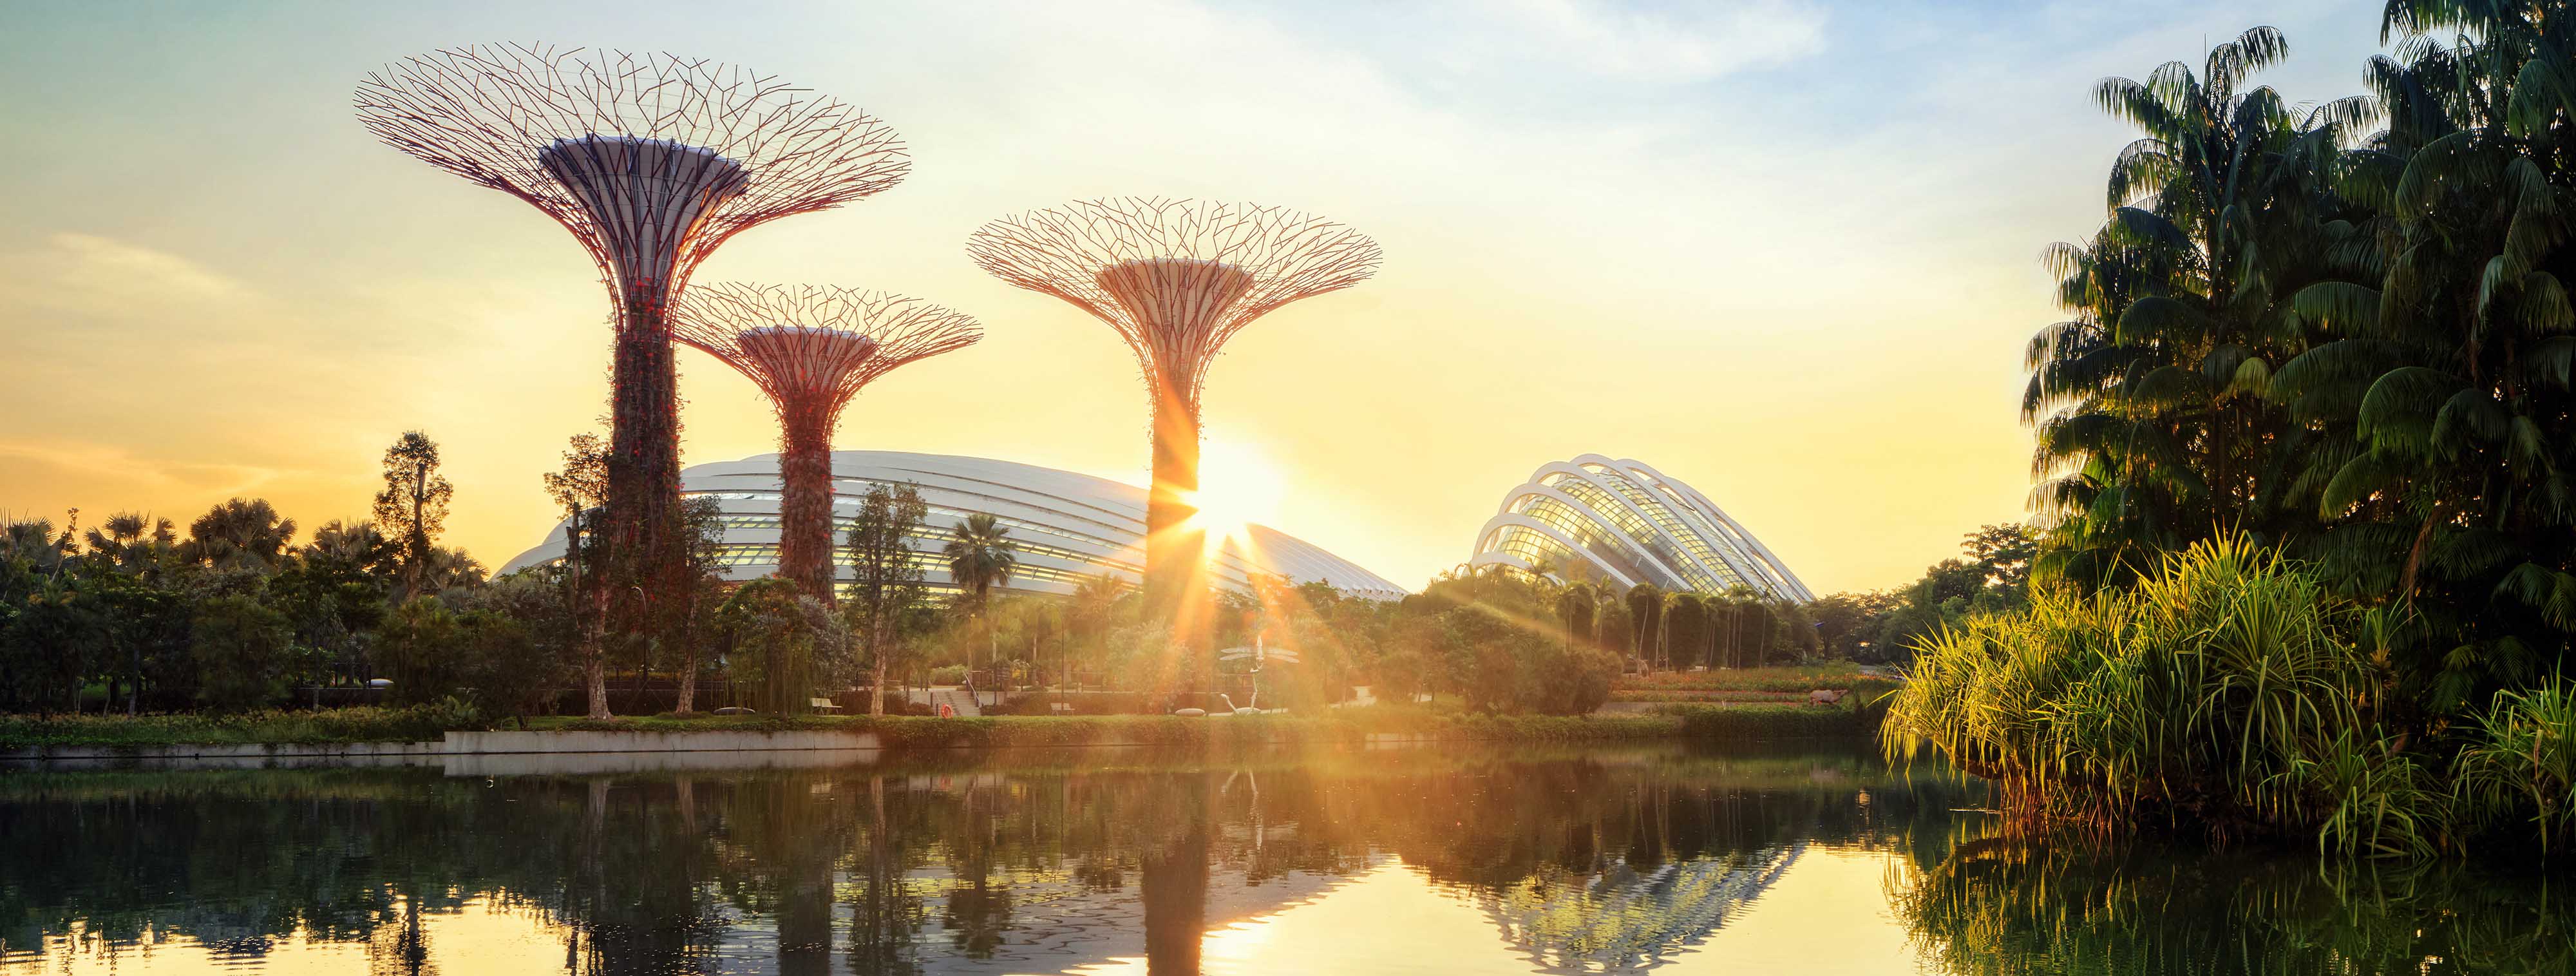 Supertree grove and Cloud garden greenhouse at sunrise